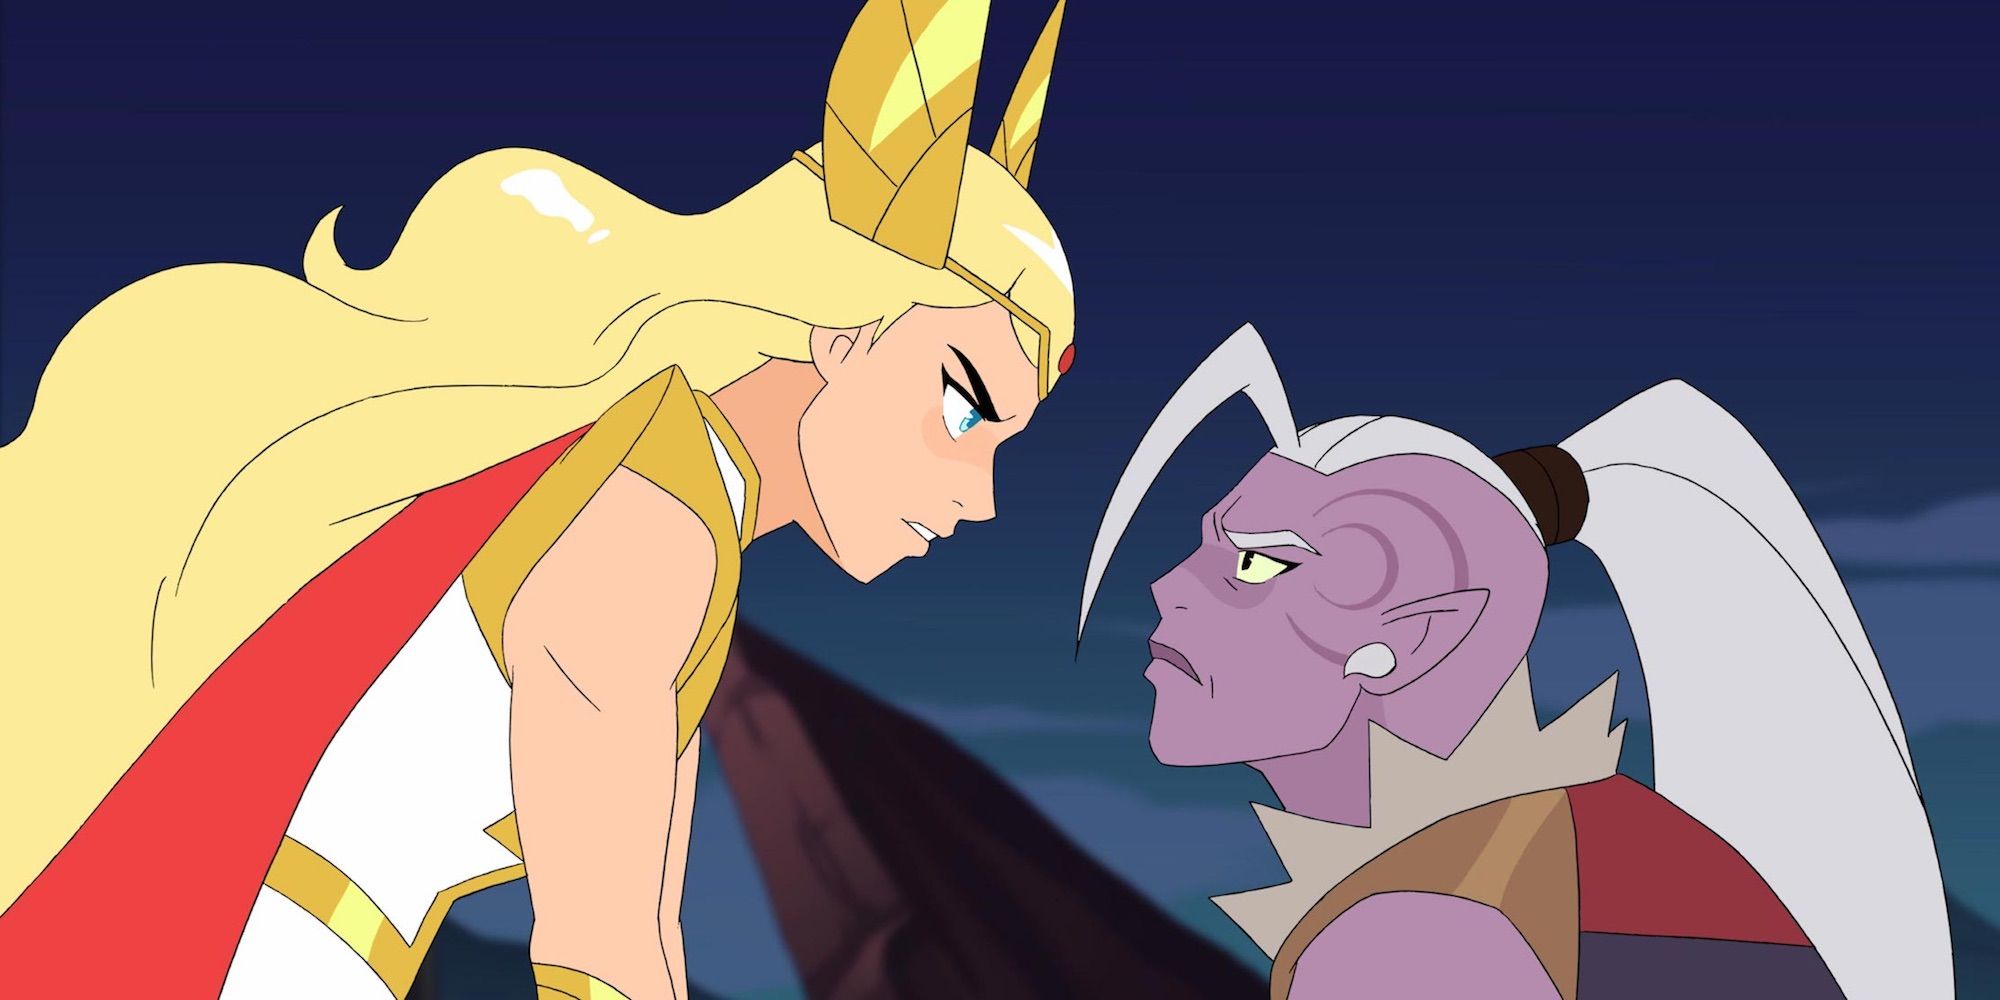 SheRa Adoras 5 Greatest Strengths (& Her 5 Weaknesses)